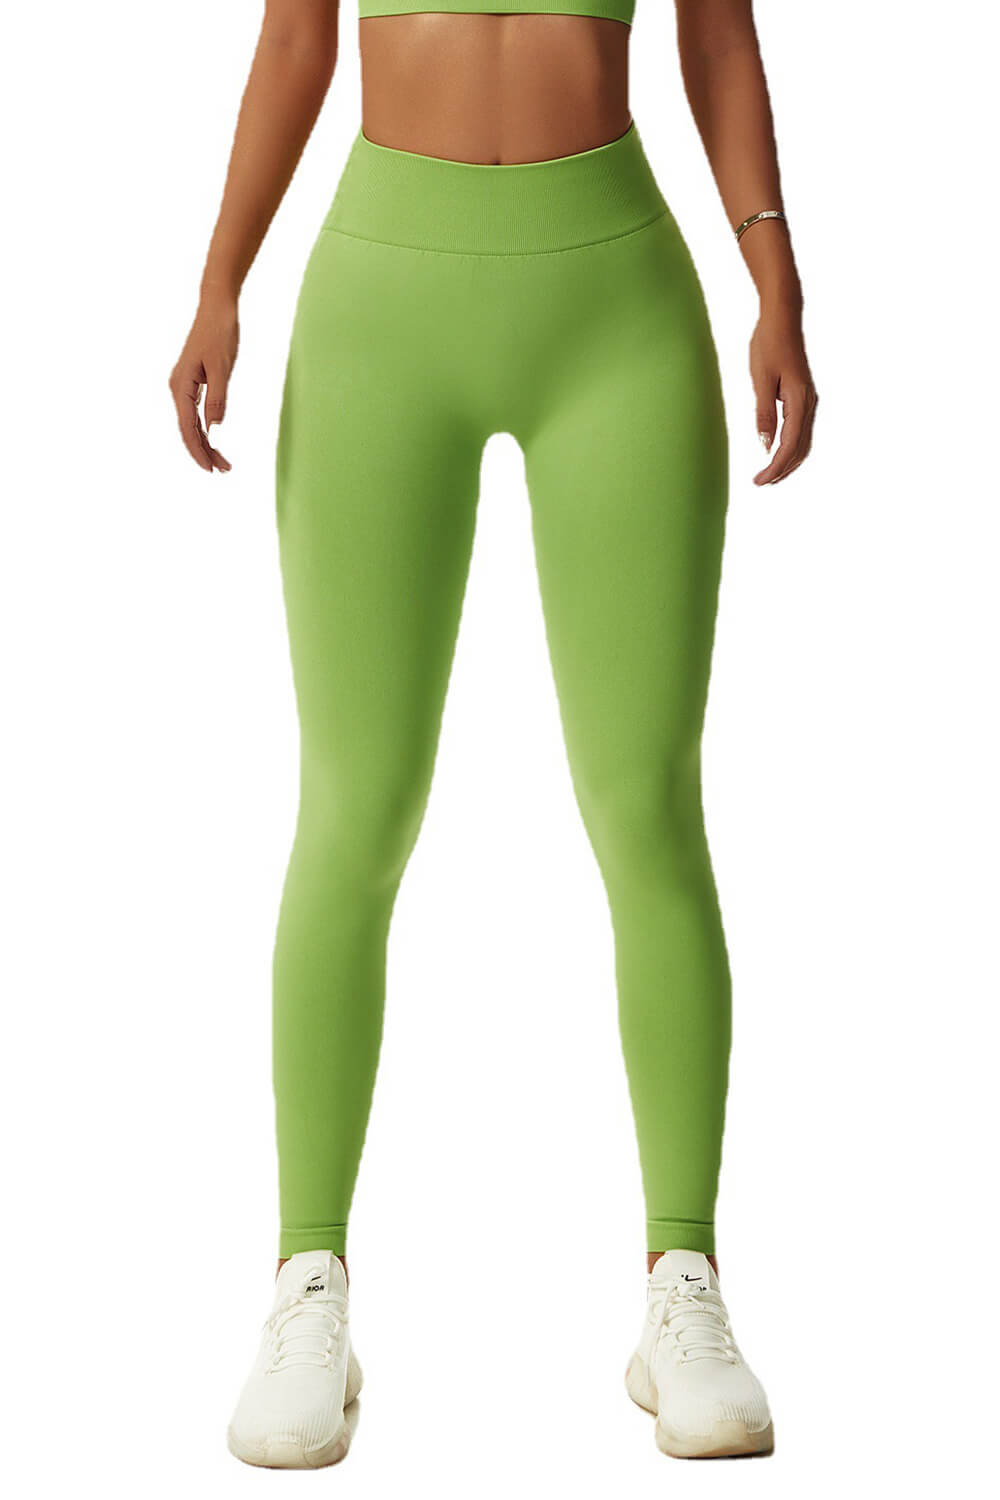 Frenchtrendz | Buy Frenchtrendz Cotton Spandex Light Green Ankle Leggings  Online India